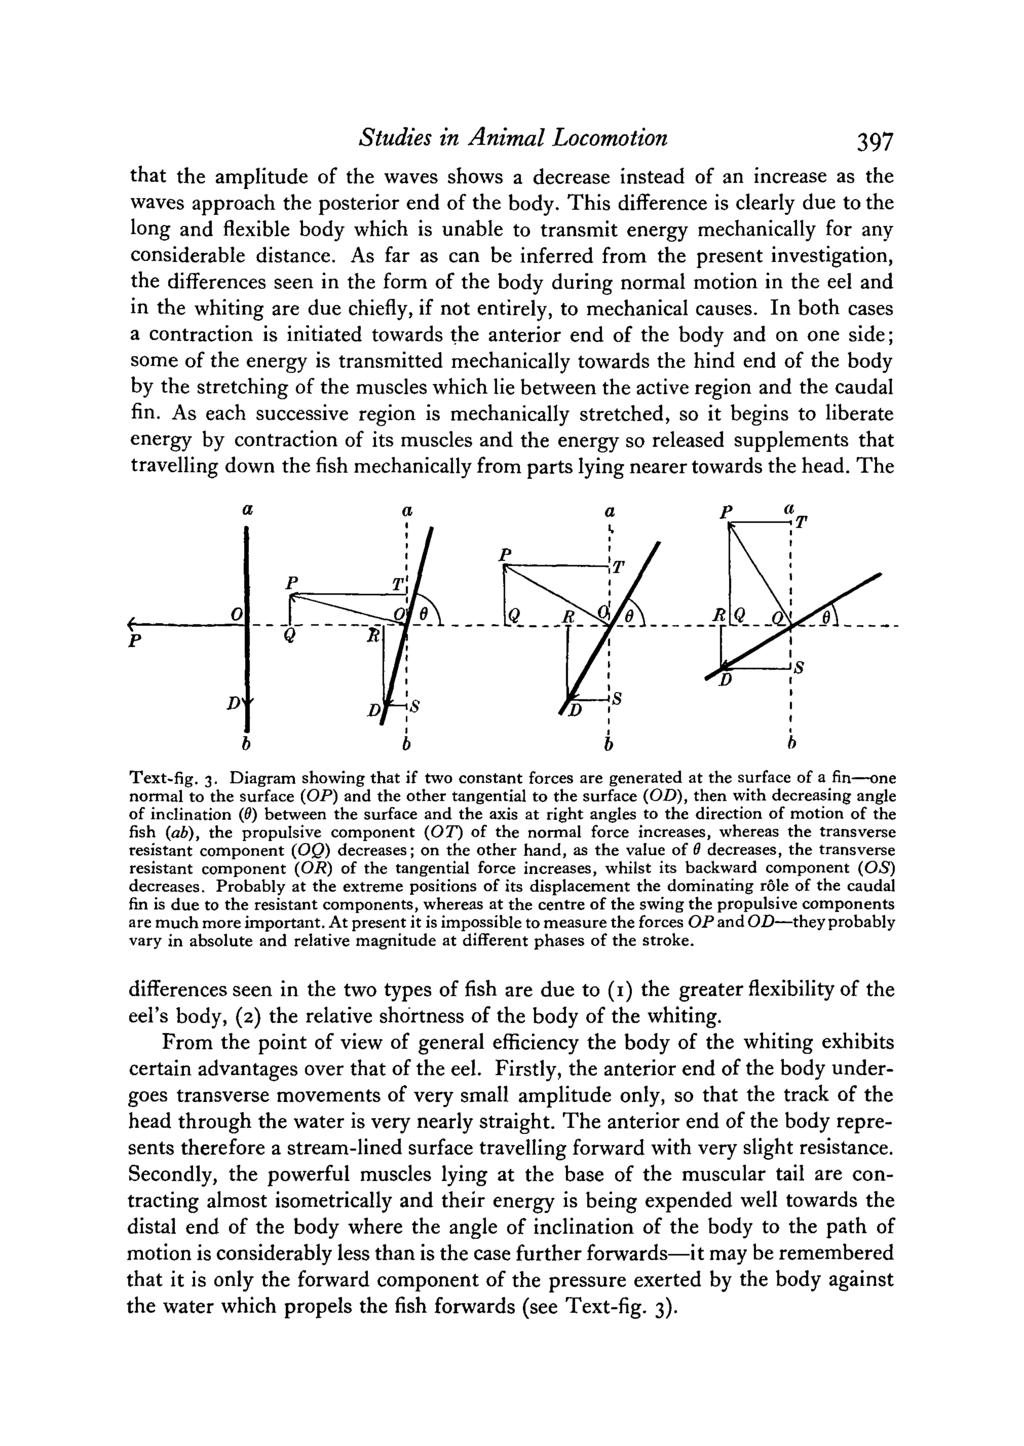 Studies in Animal Locomotion 397 that the amplitude of the waves shows a decrease instead of an increase as the waves approach the posterior end of the body.